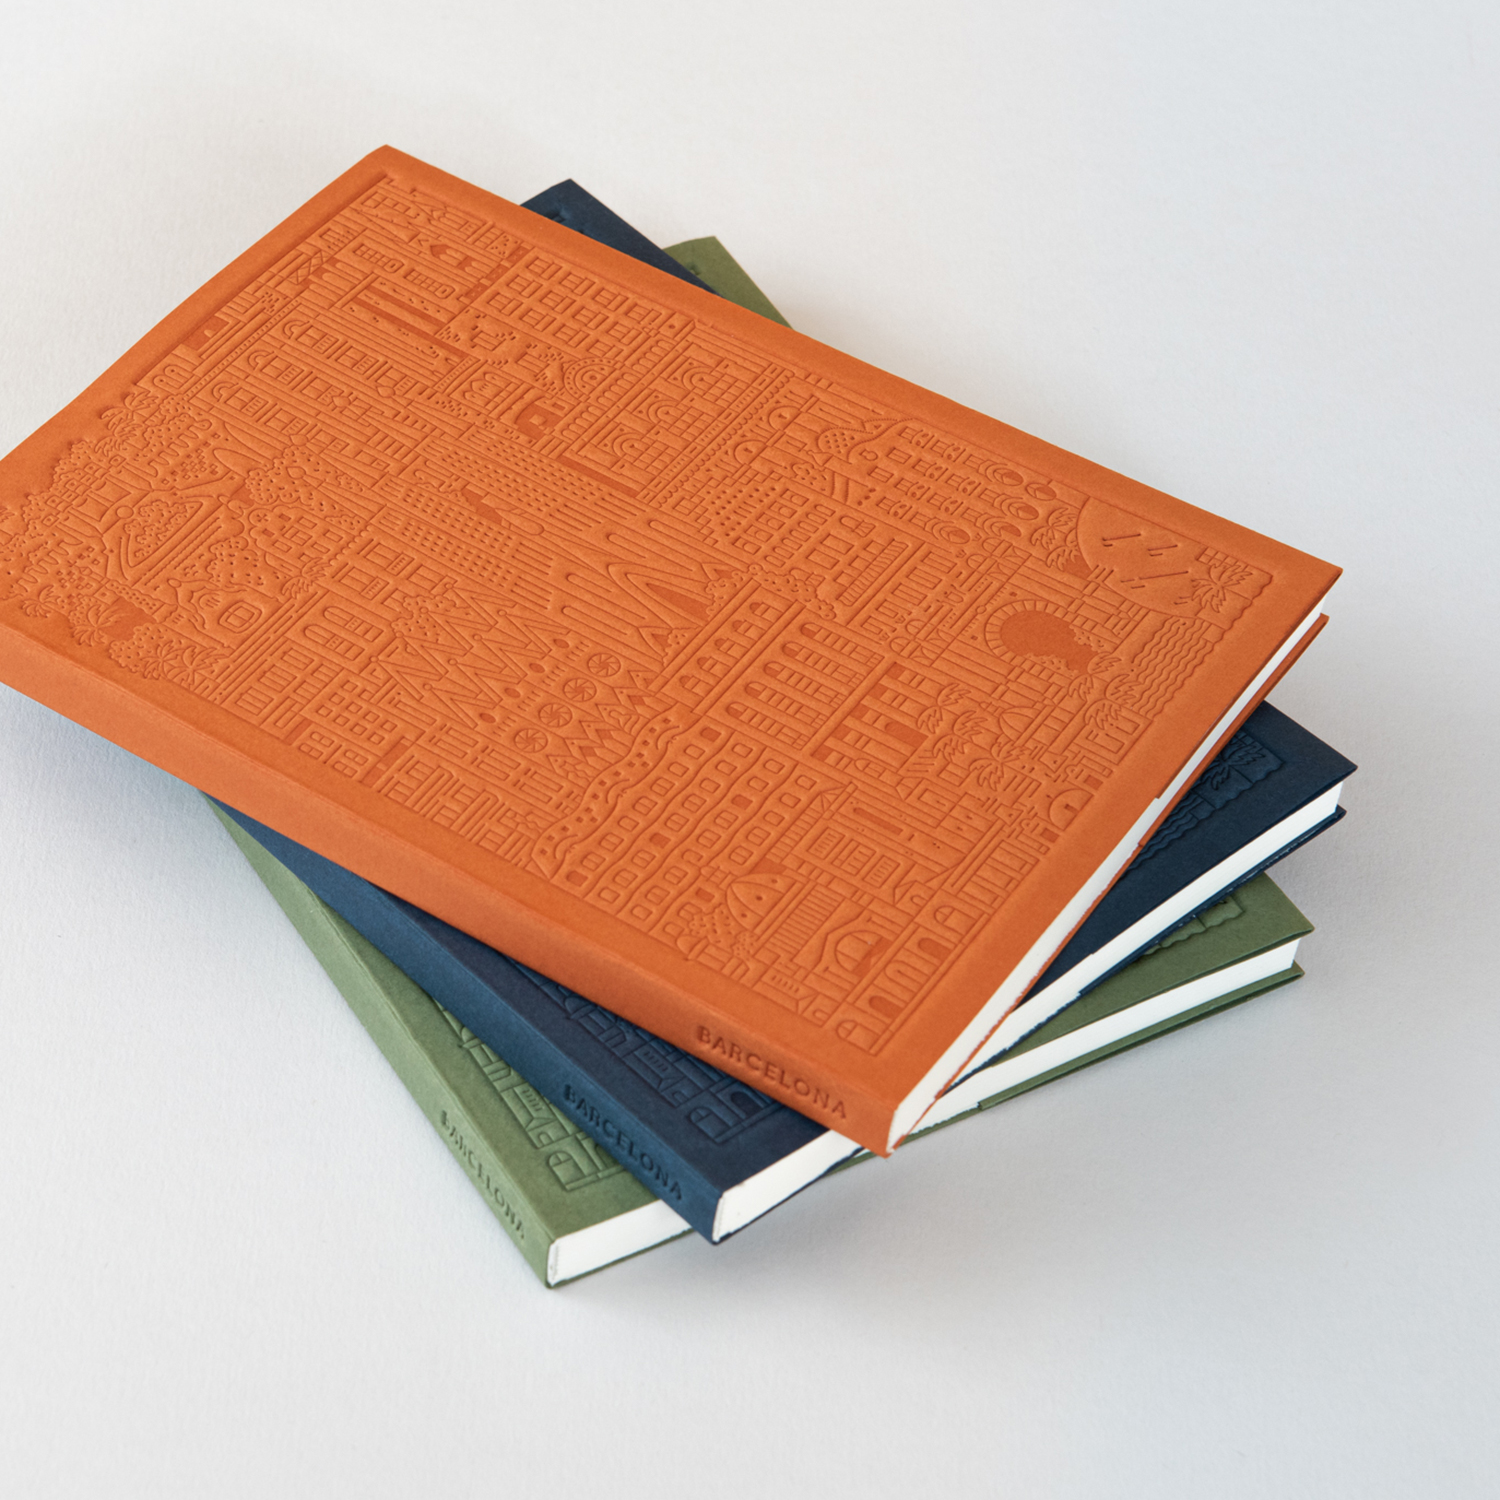 Barcelona Notebook Stack by The City Works